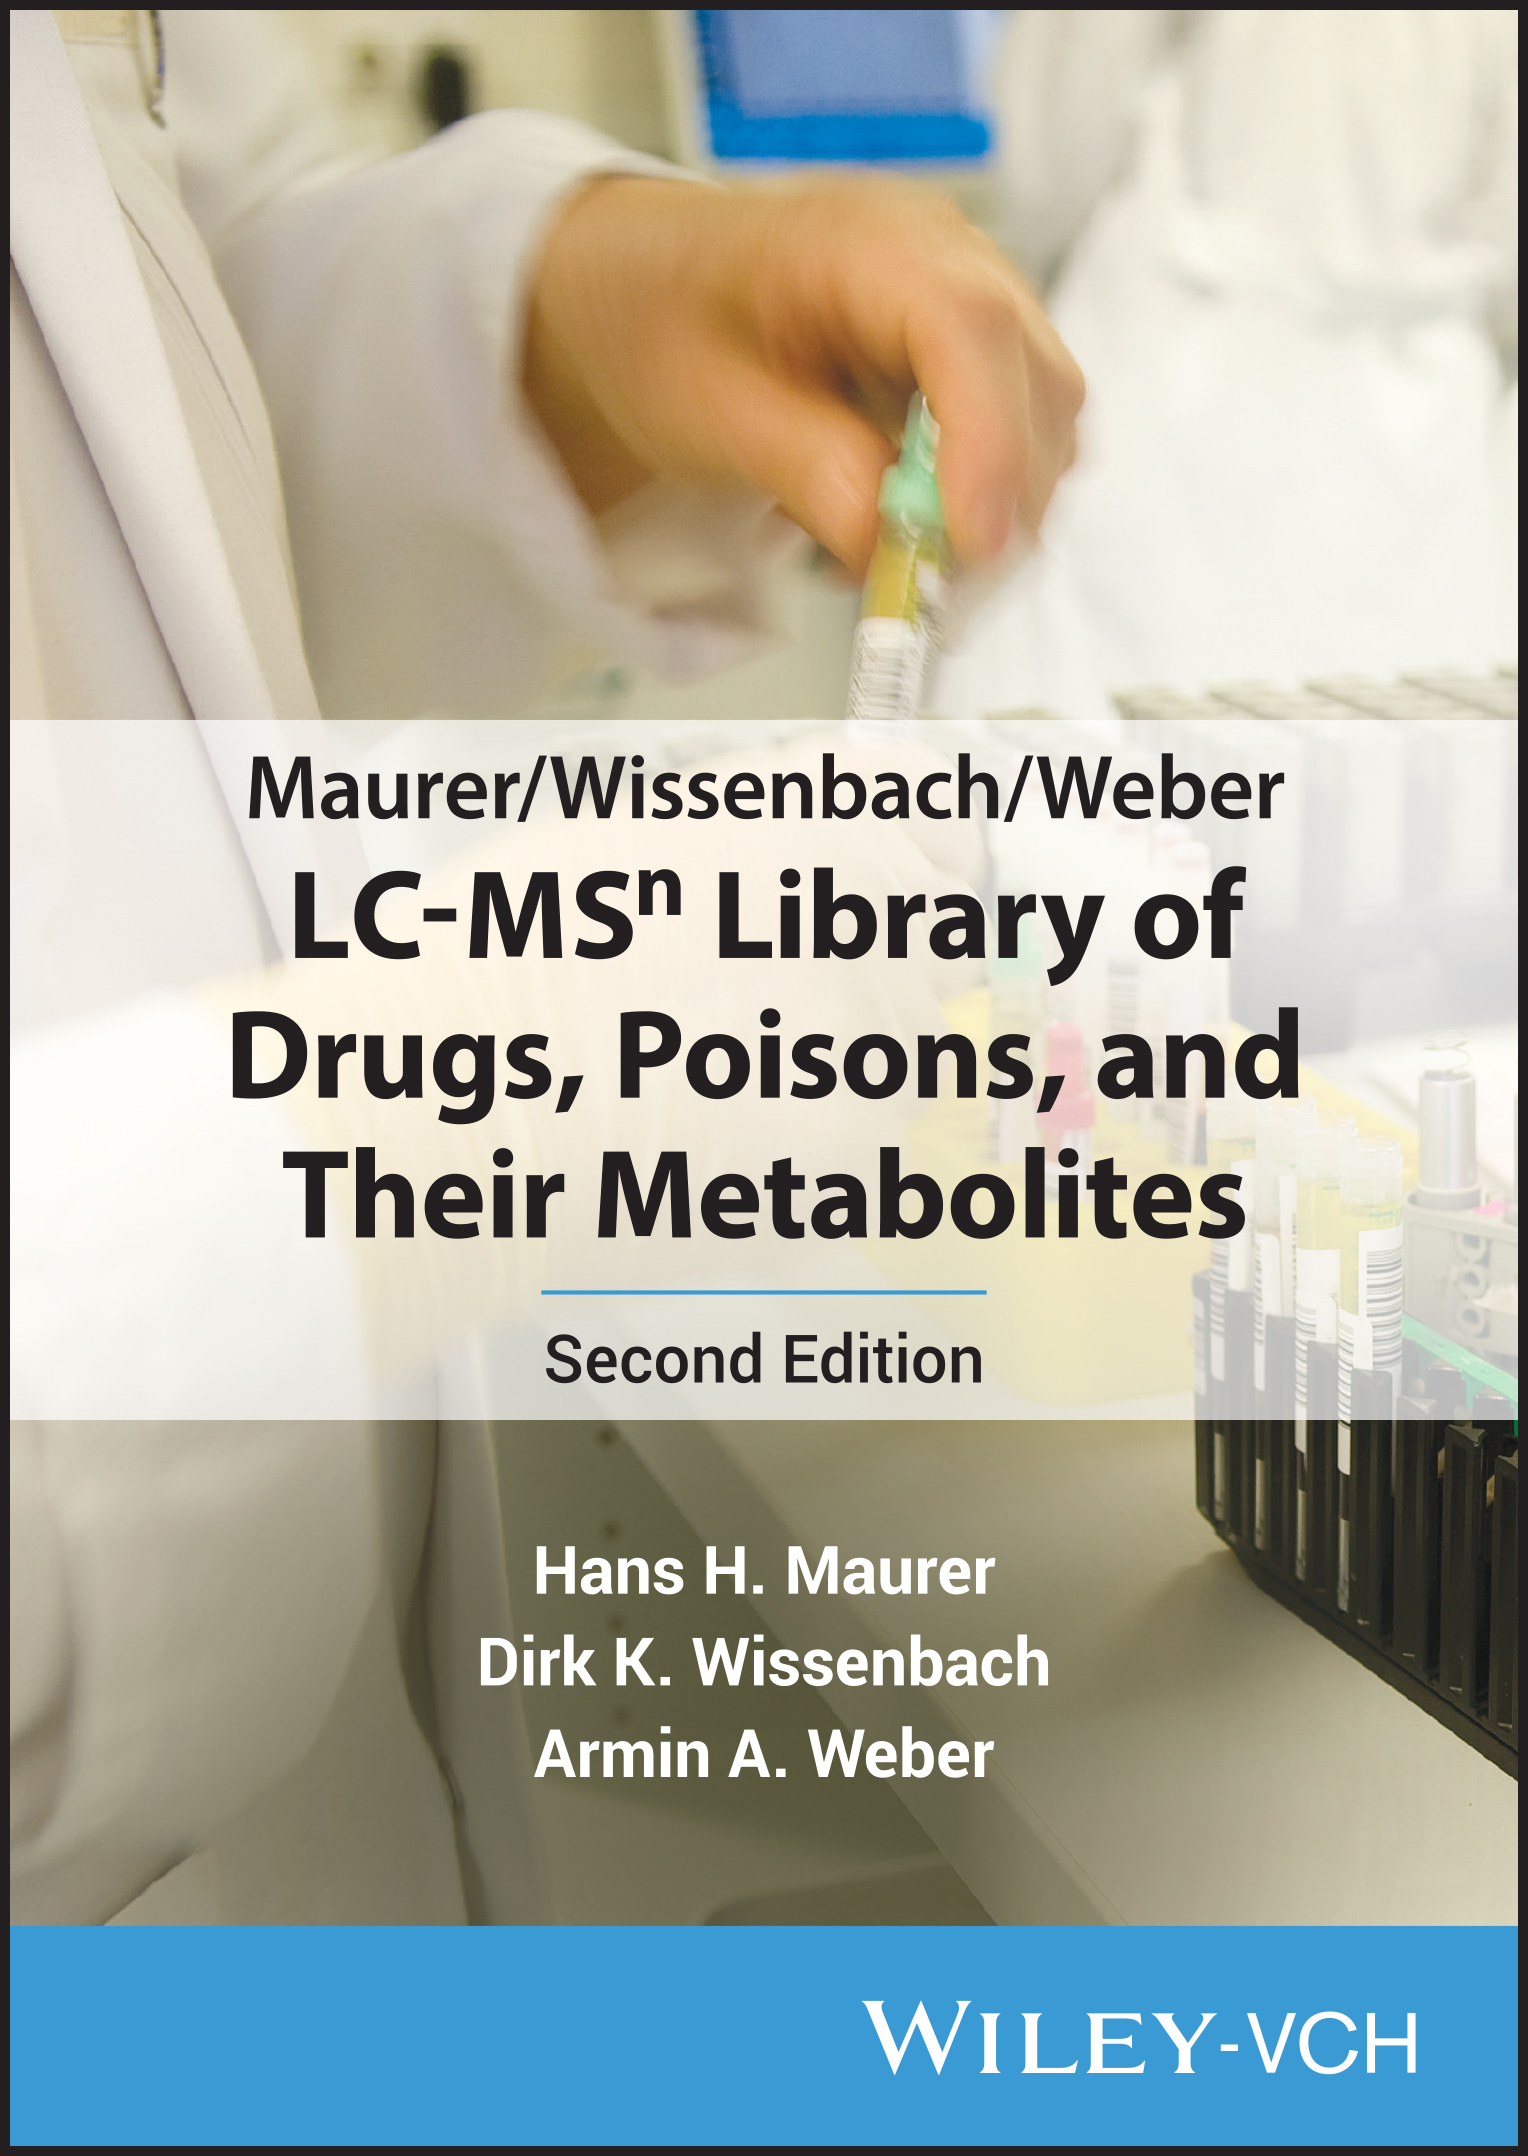 Wiley LC-MSⁿ Library of Drugs, Poisons and Their Metabolites, 2nd Edition